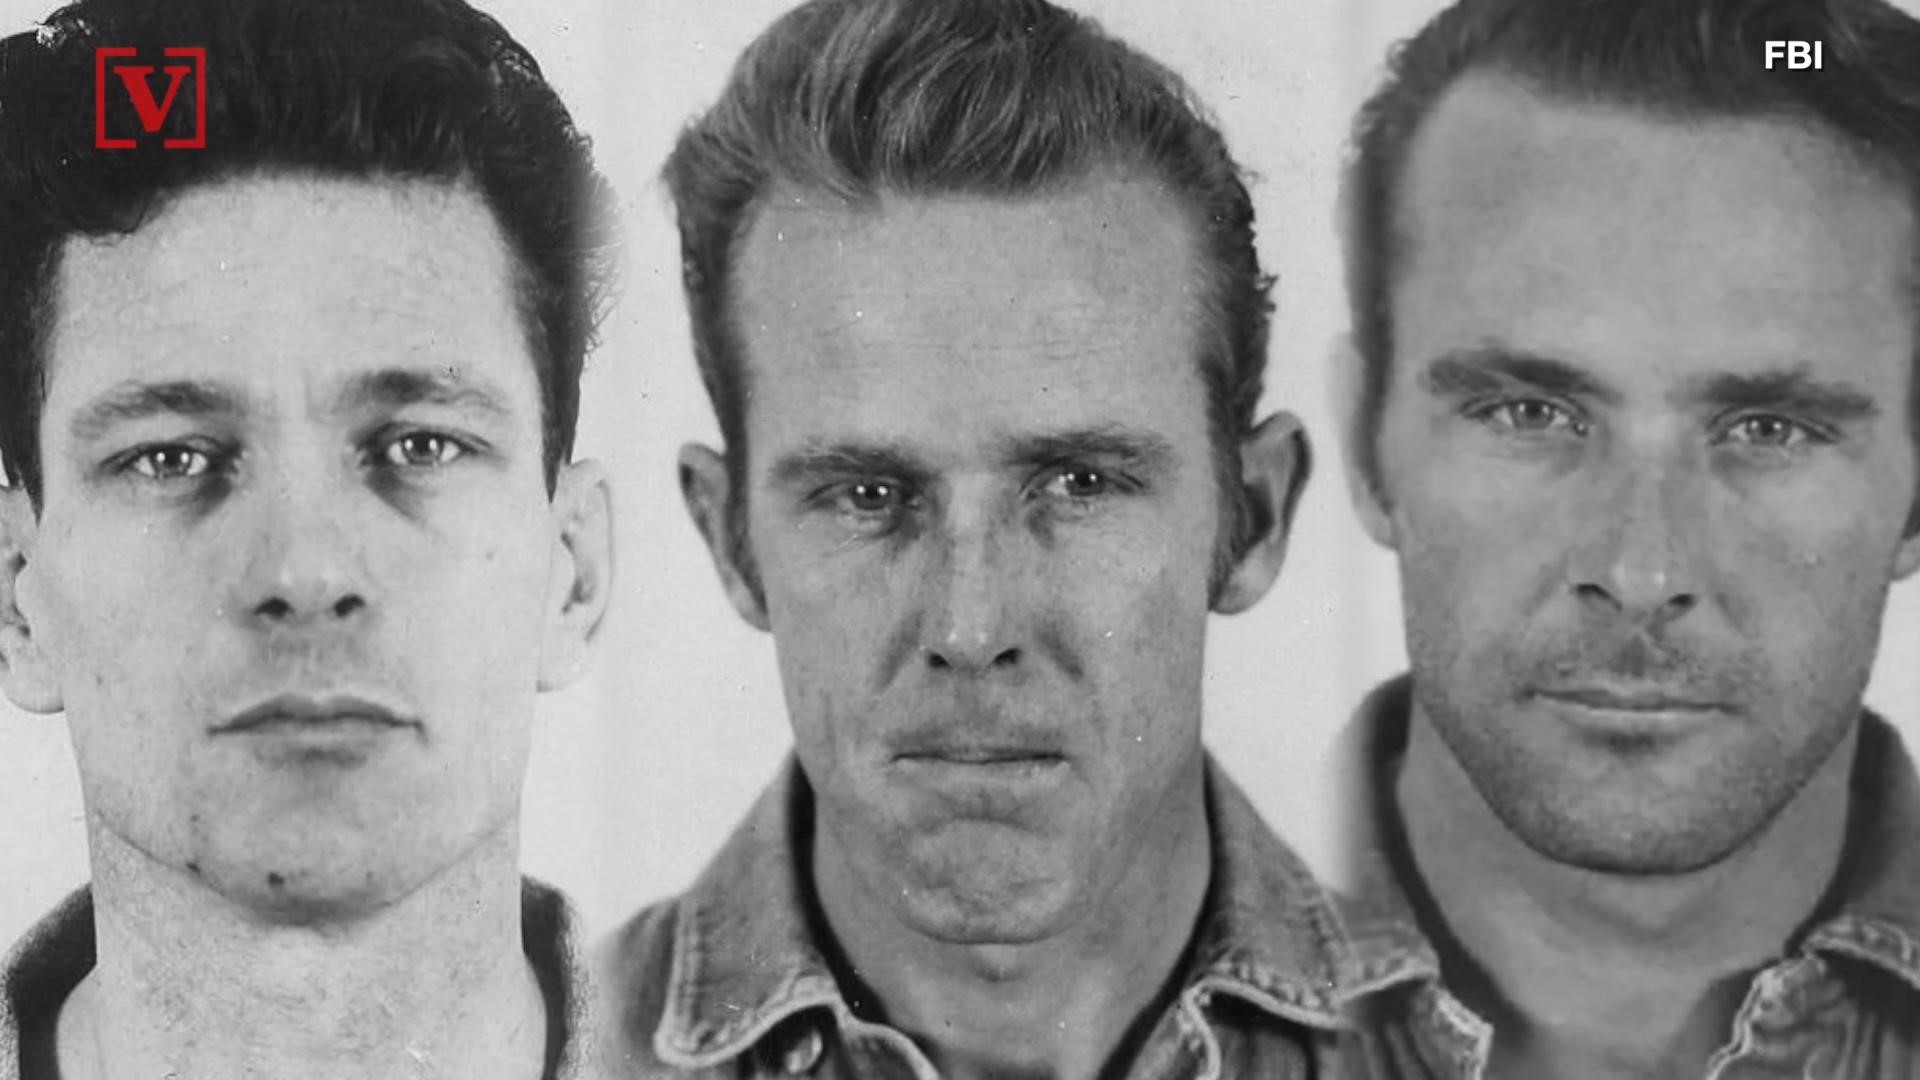 Escape from Alcatraz Letter claiming inmates survived 'inconclusive